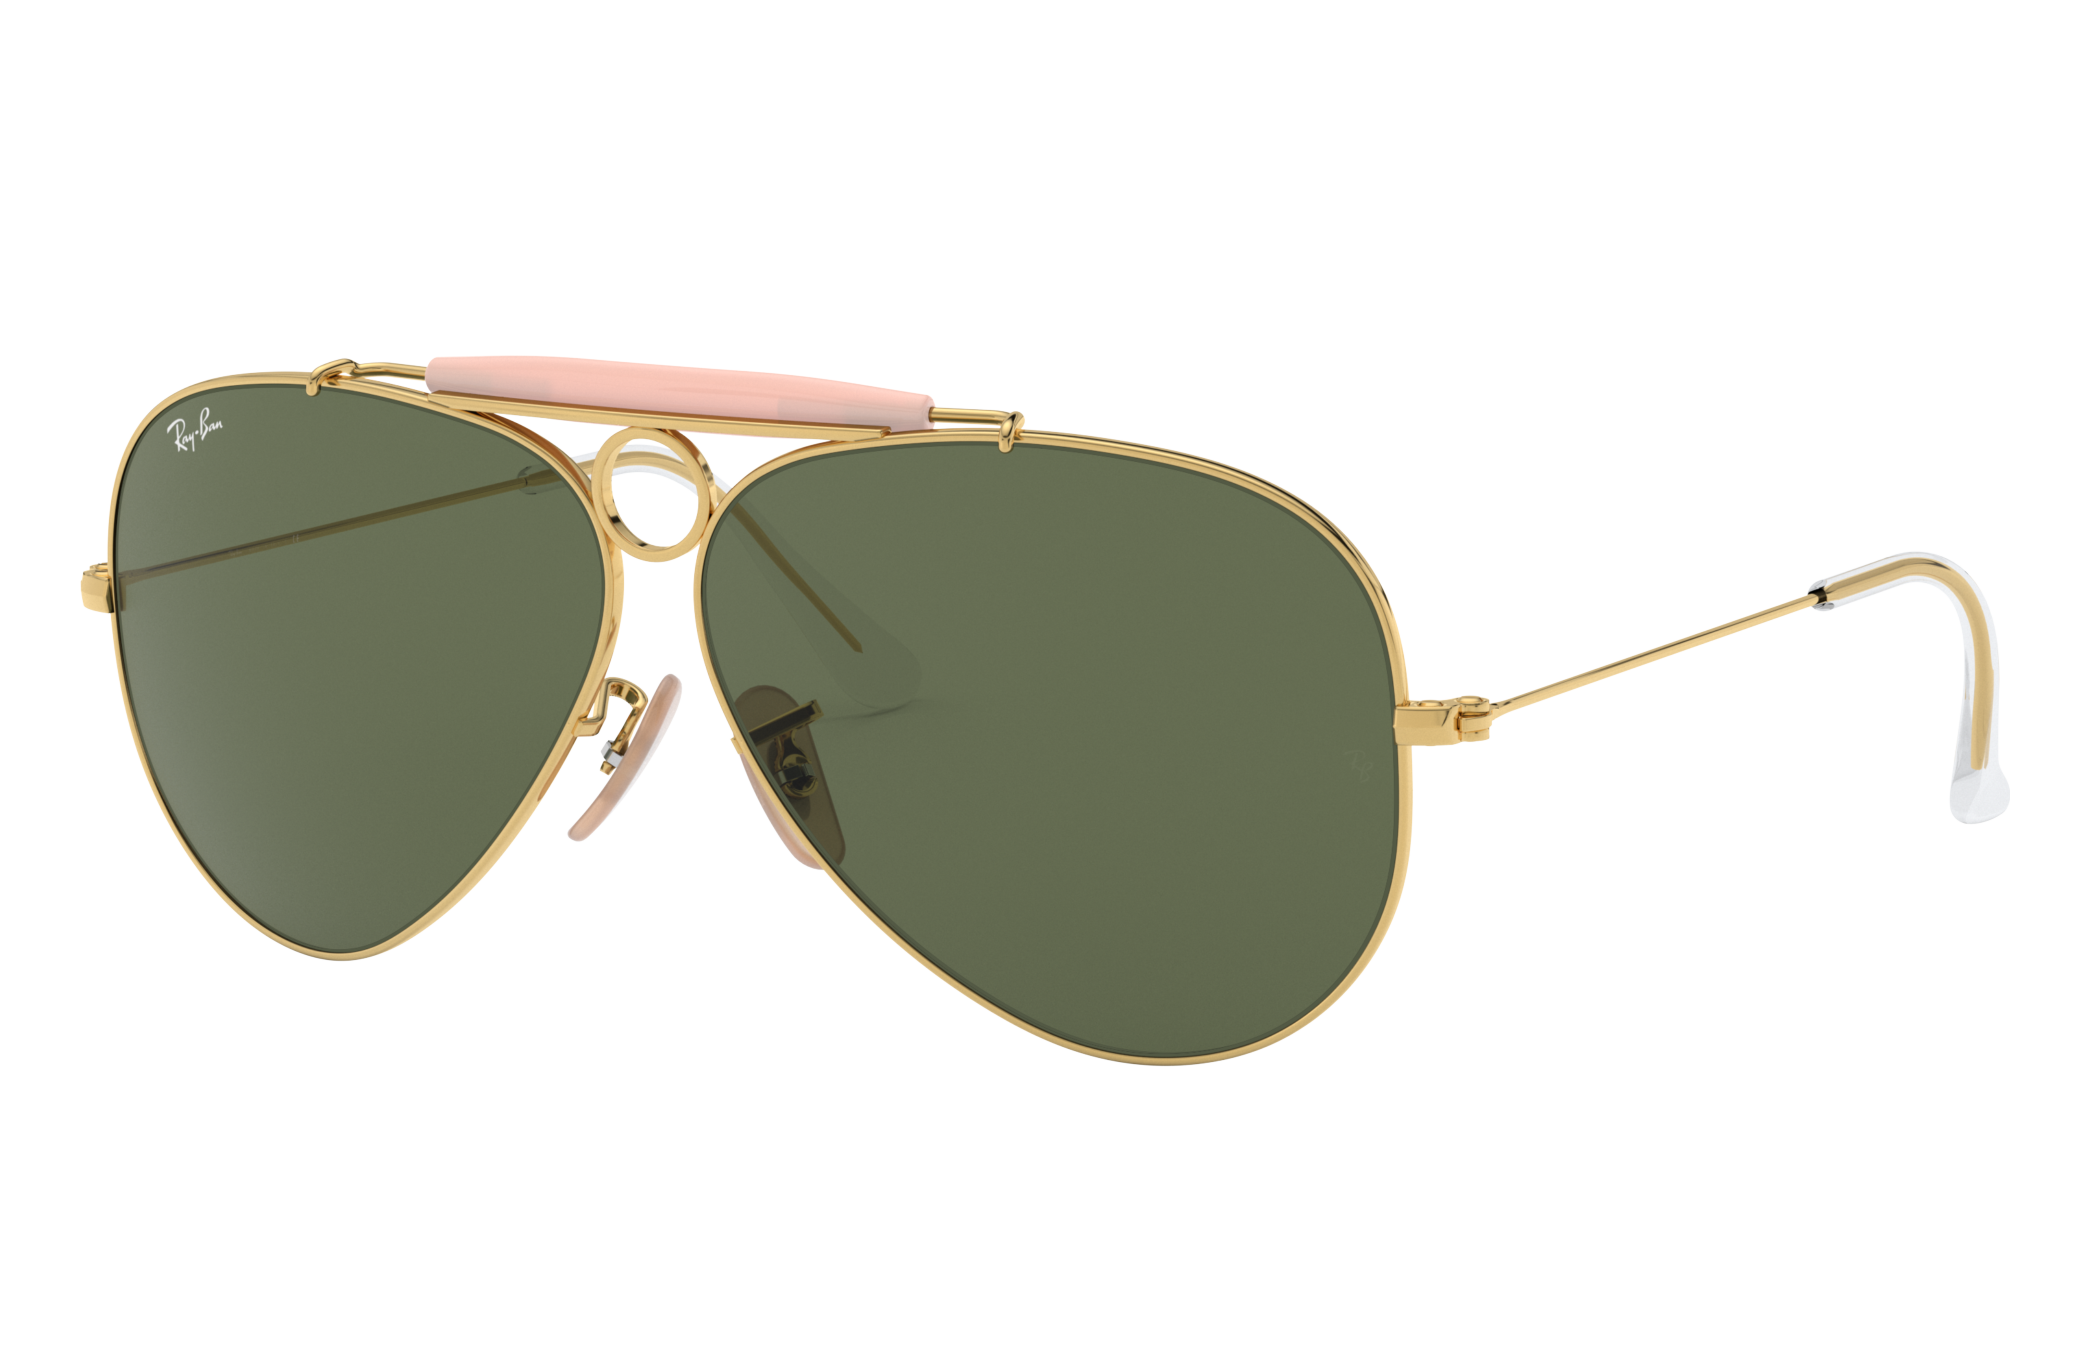 Ray-Ban created sunglasses with concave lenses